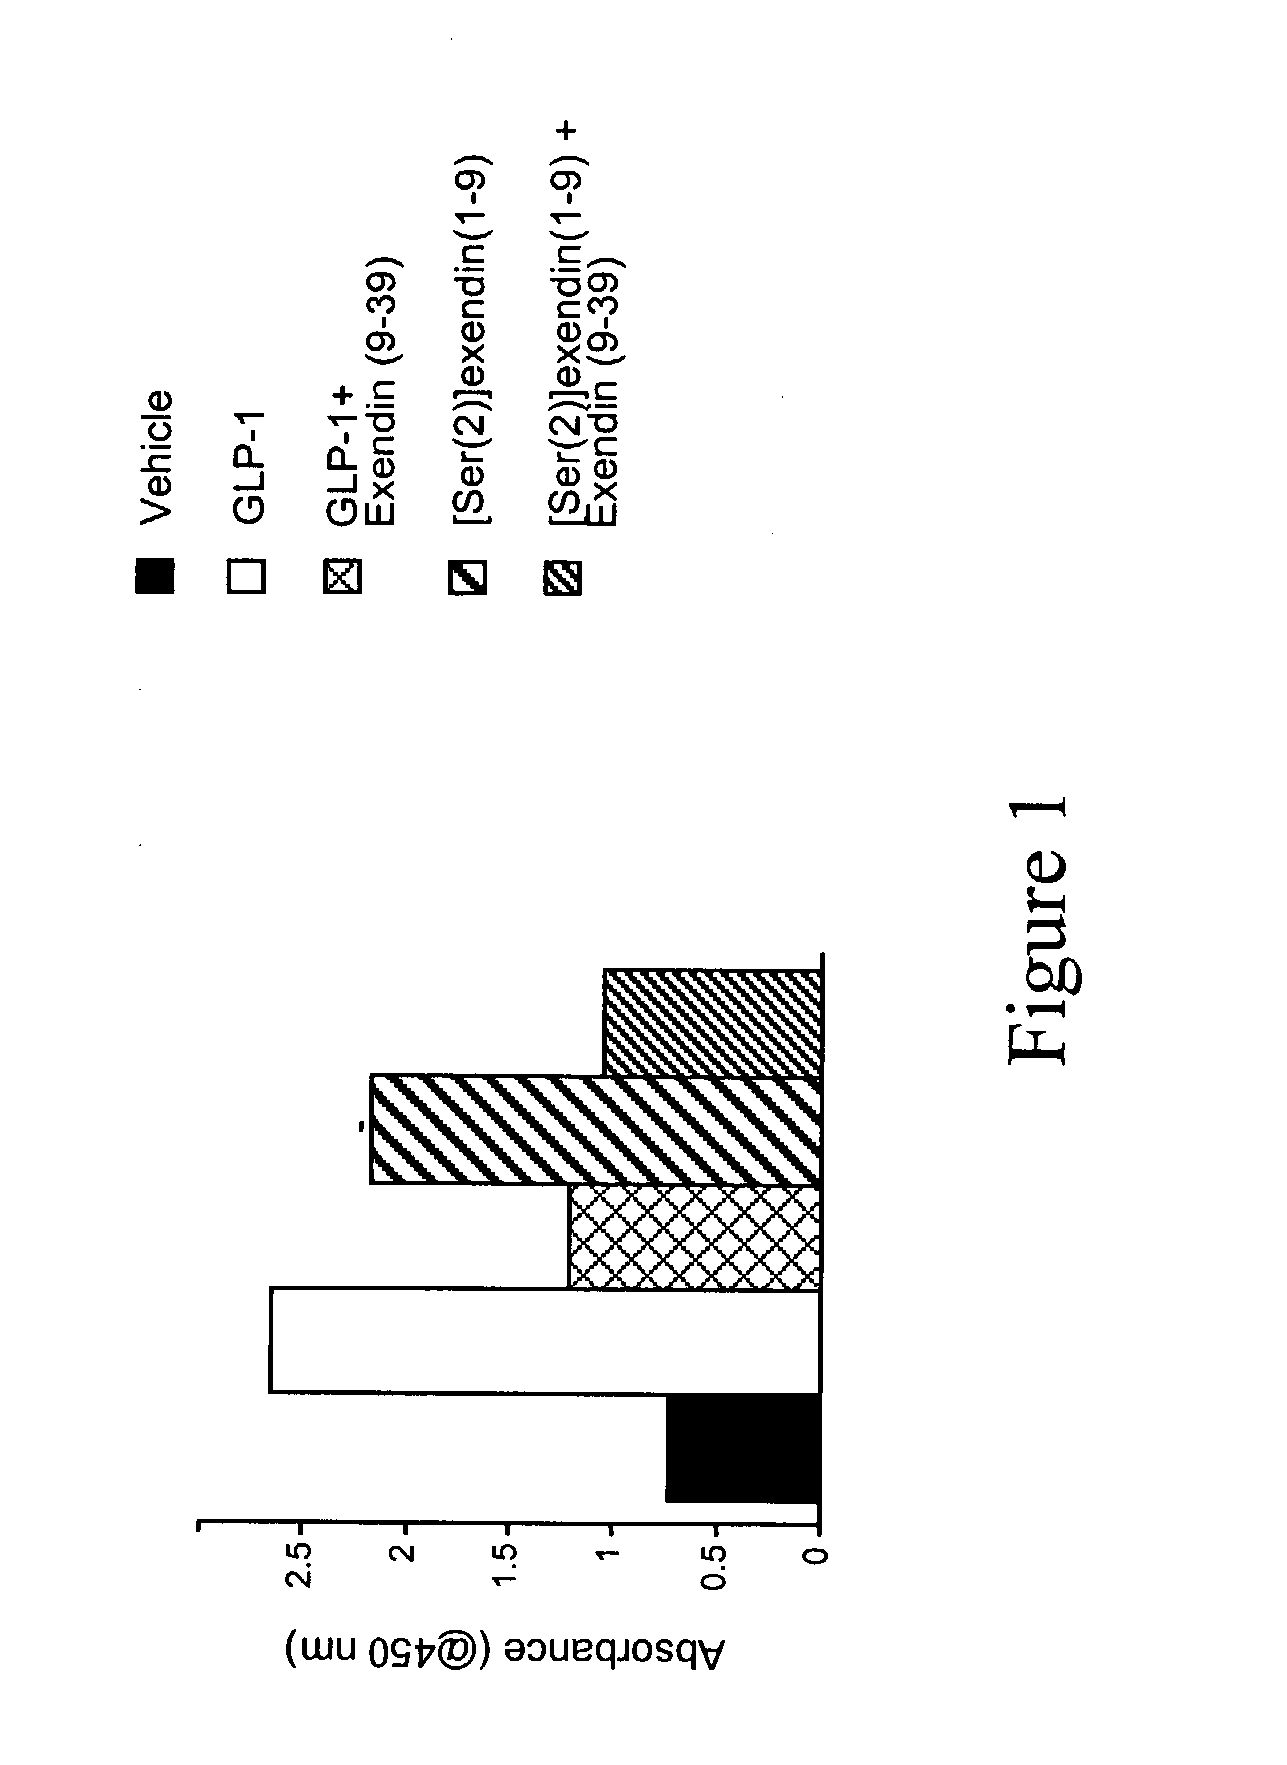 Peptide compositions with effects on blood glucose